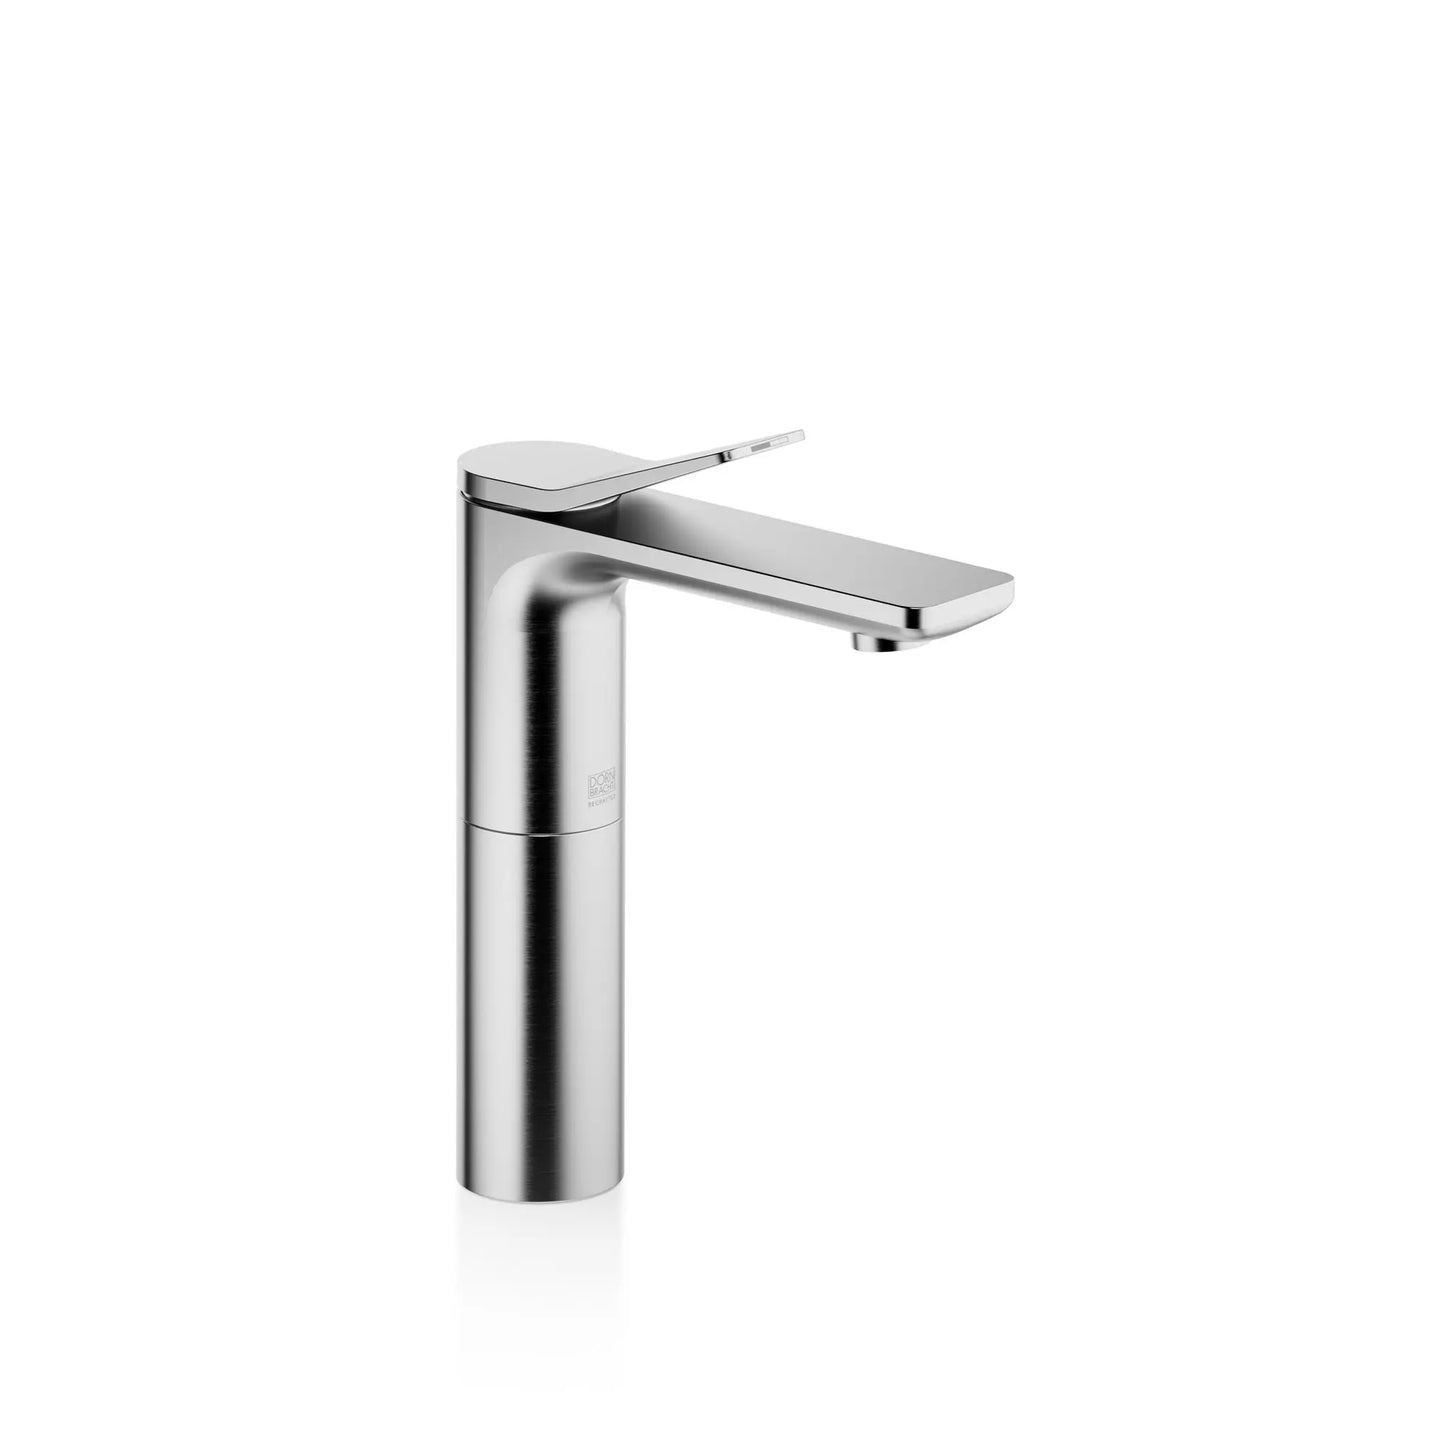 LISSÉ Single-lever basin mixer with high spout without pop-up waste